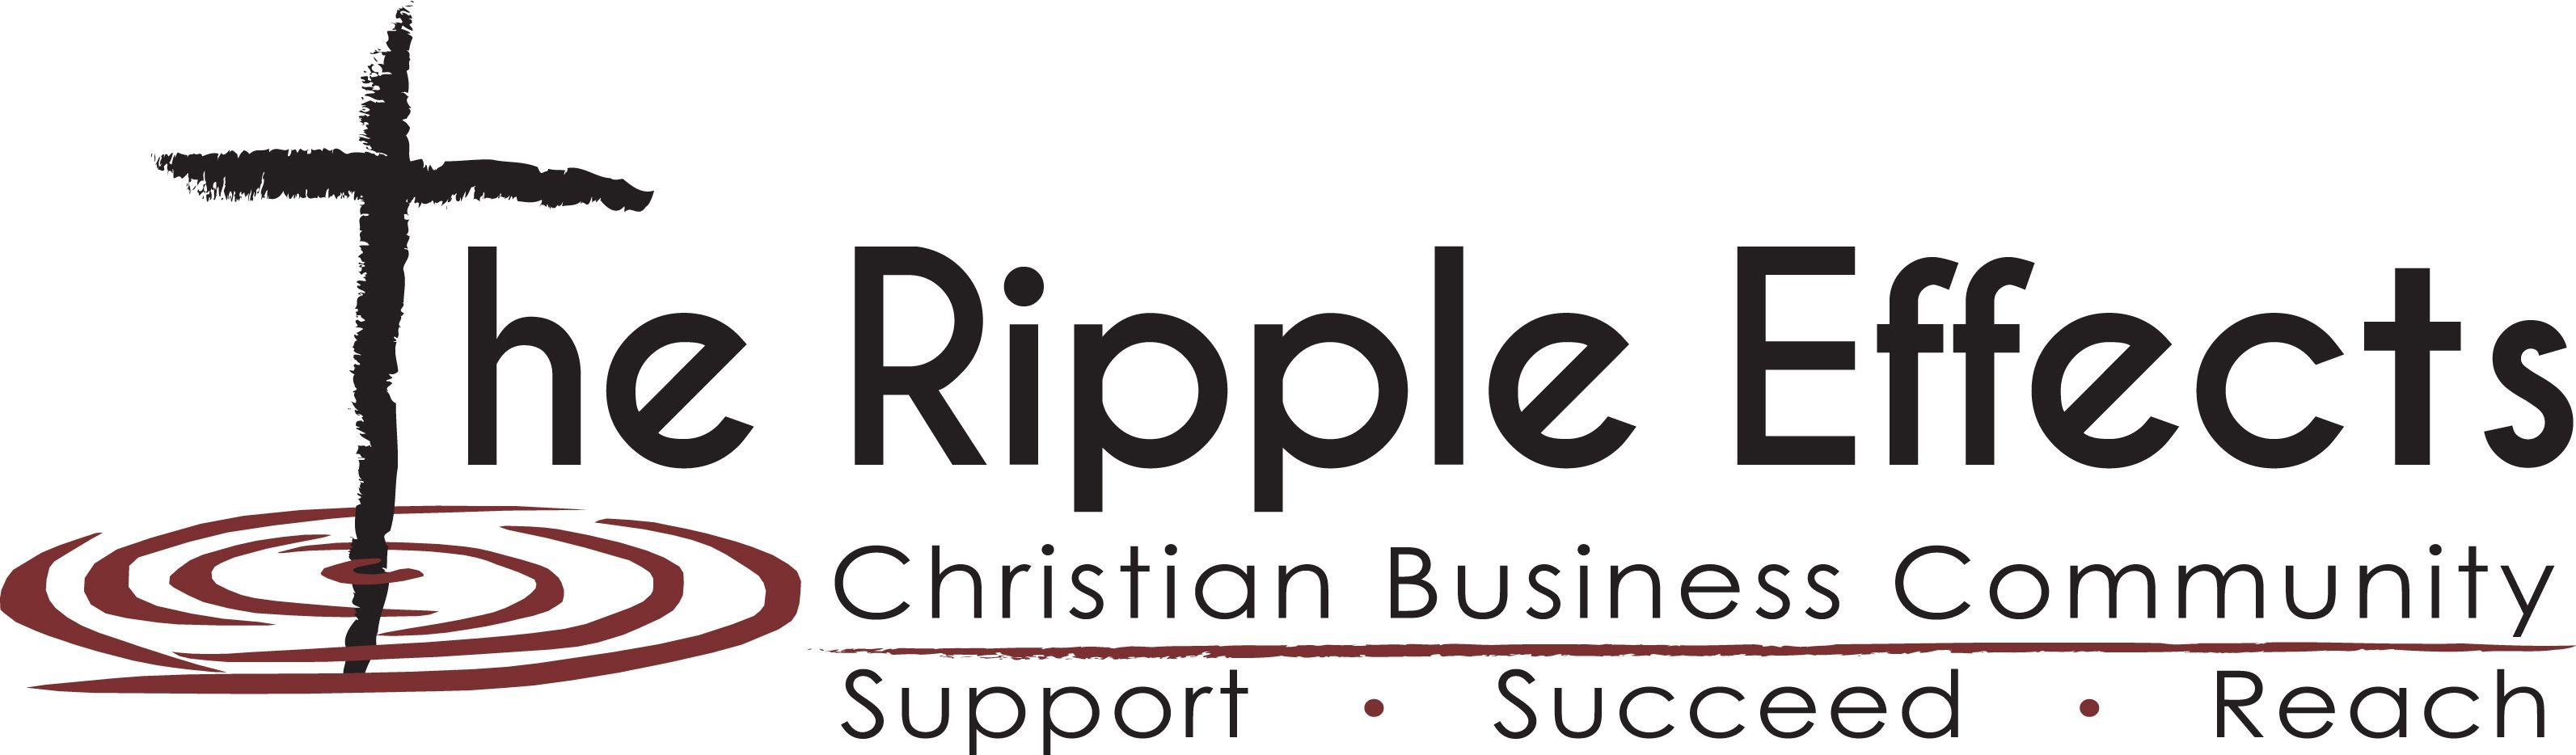 Christian Business Logo - The Ripple Effects Christian Business Directory